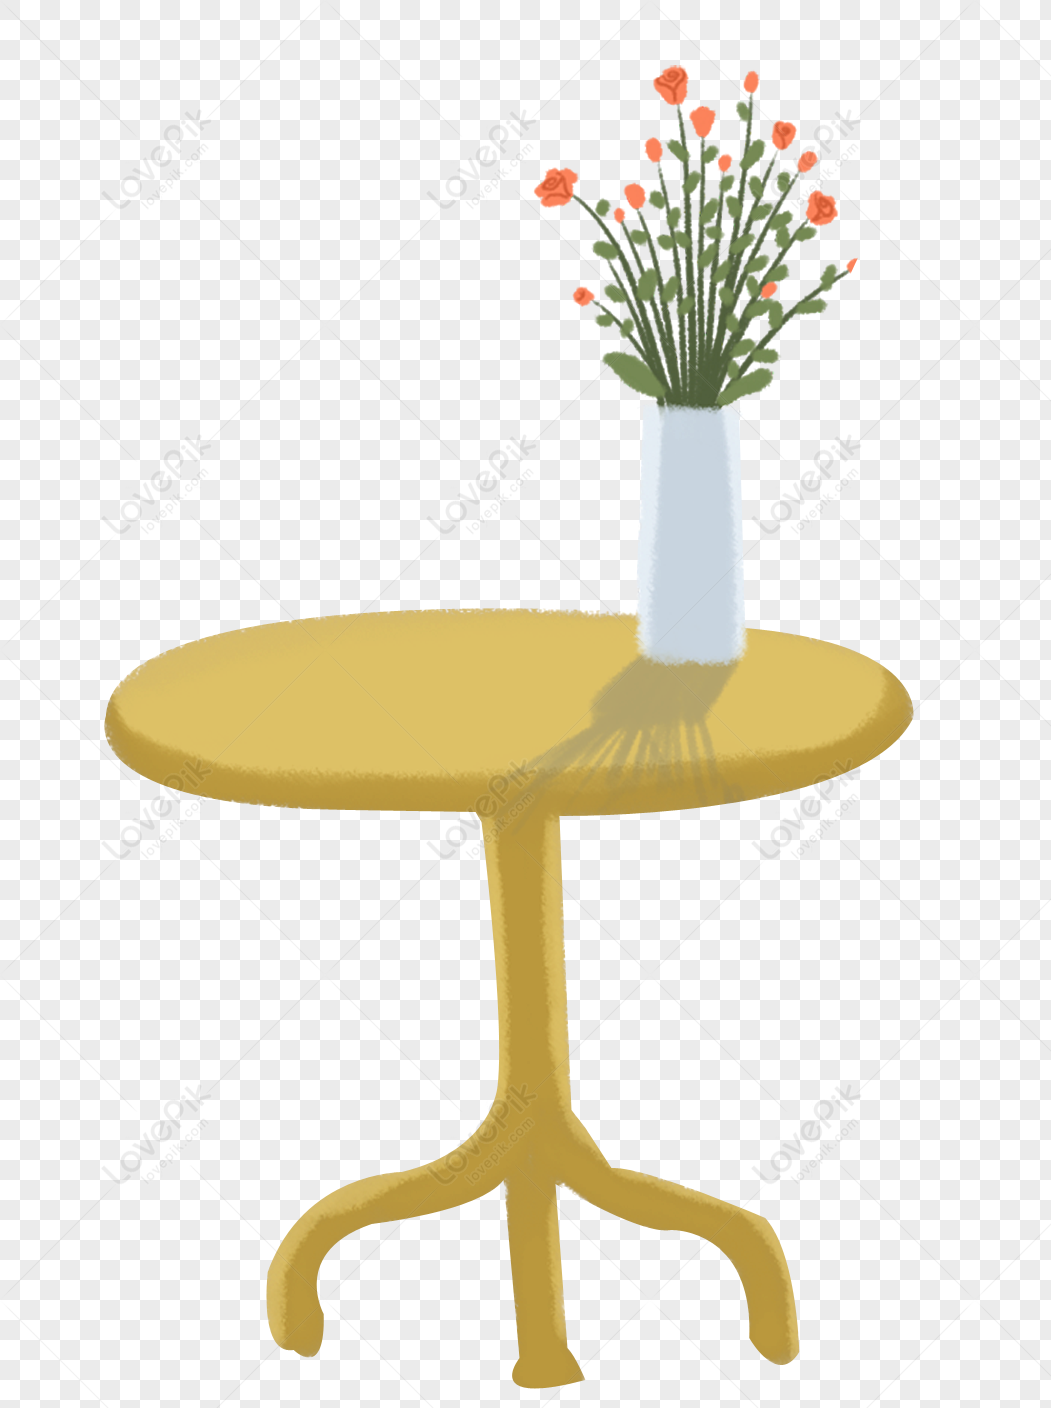 thick Pine Enrich A Vase On The Table PNG White Transparent And Clipart Image For Free  Download - Lovepik | 400235342